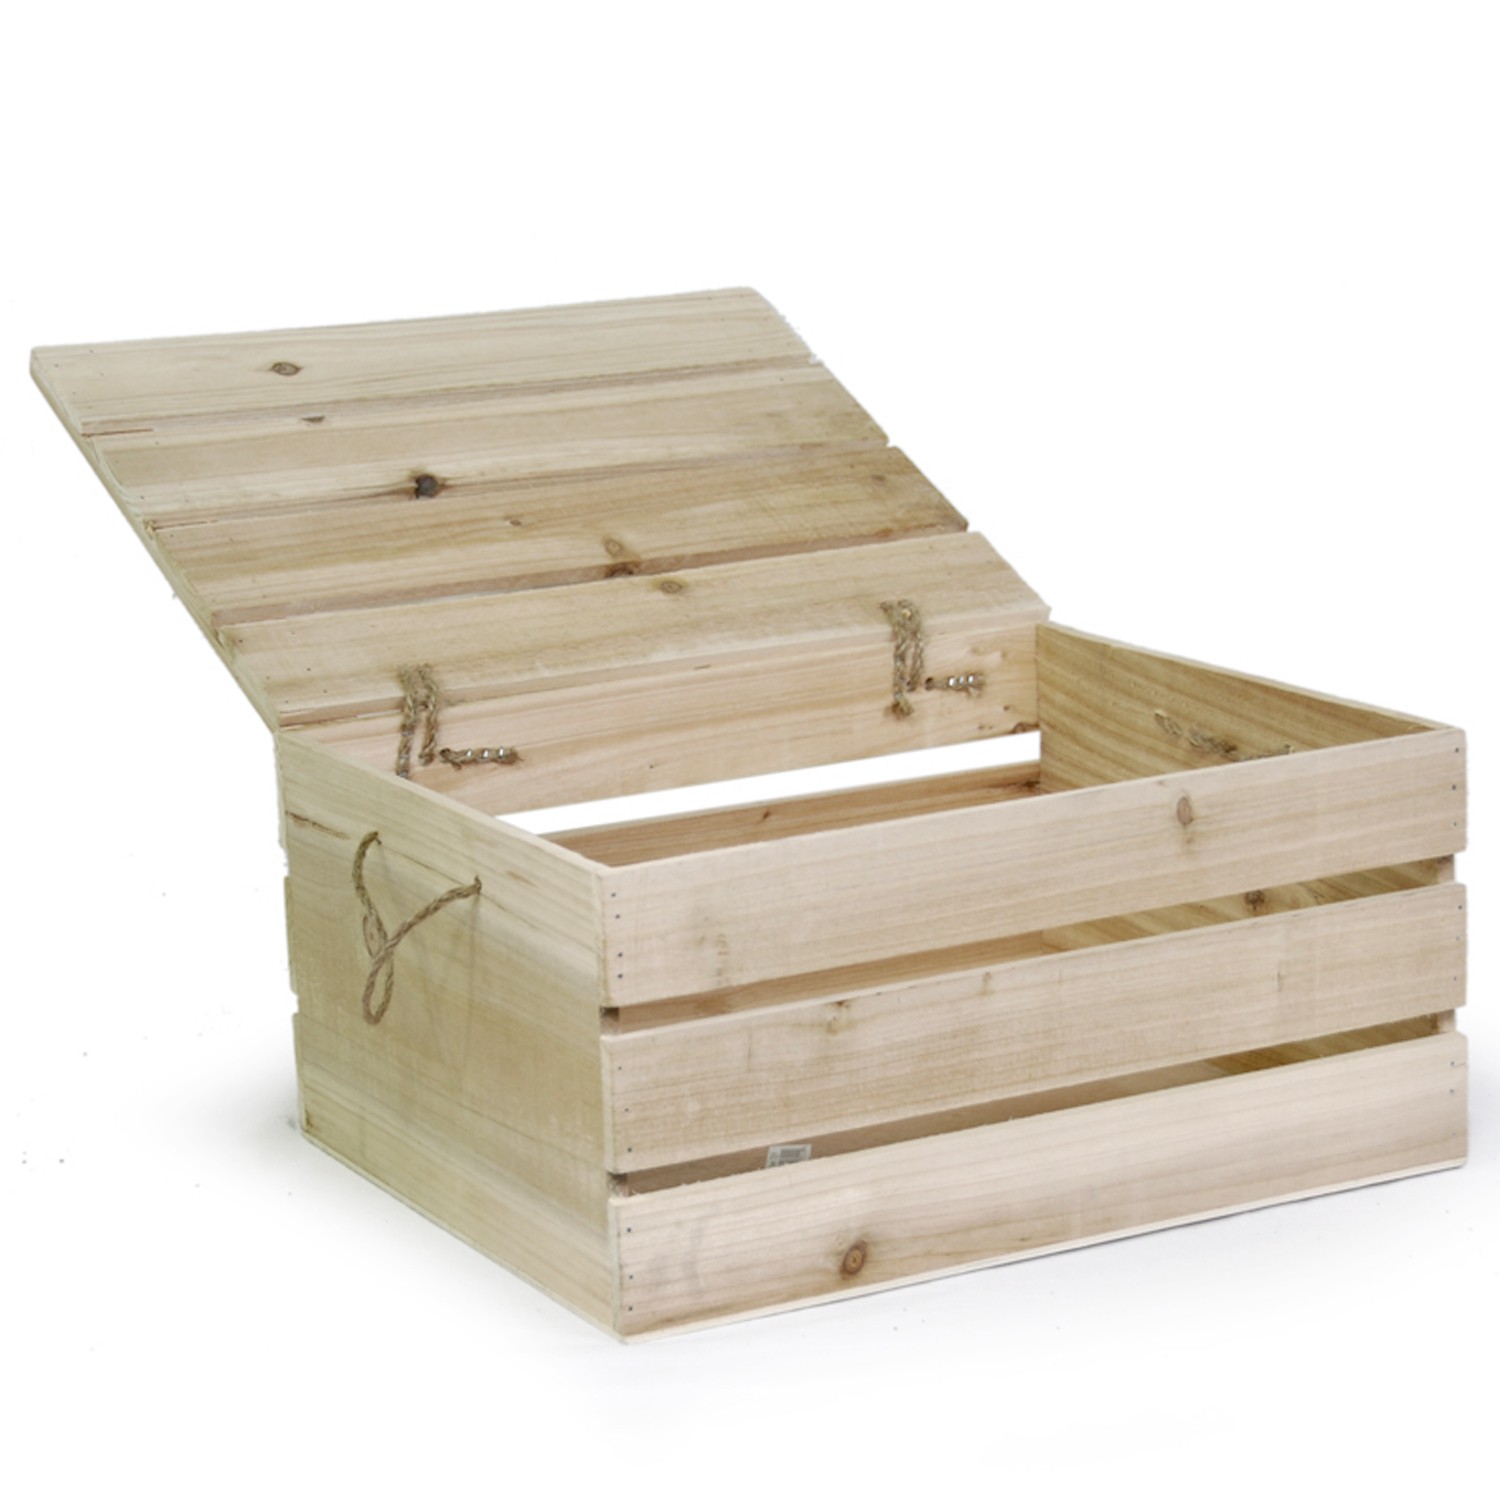 Large wooden toy chest